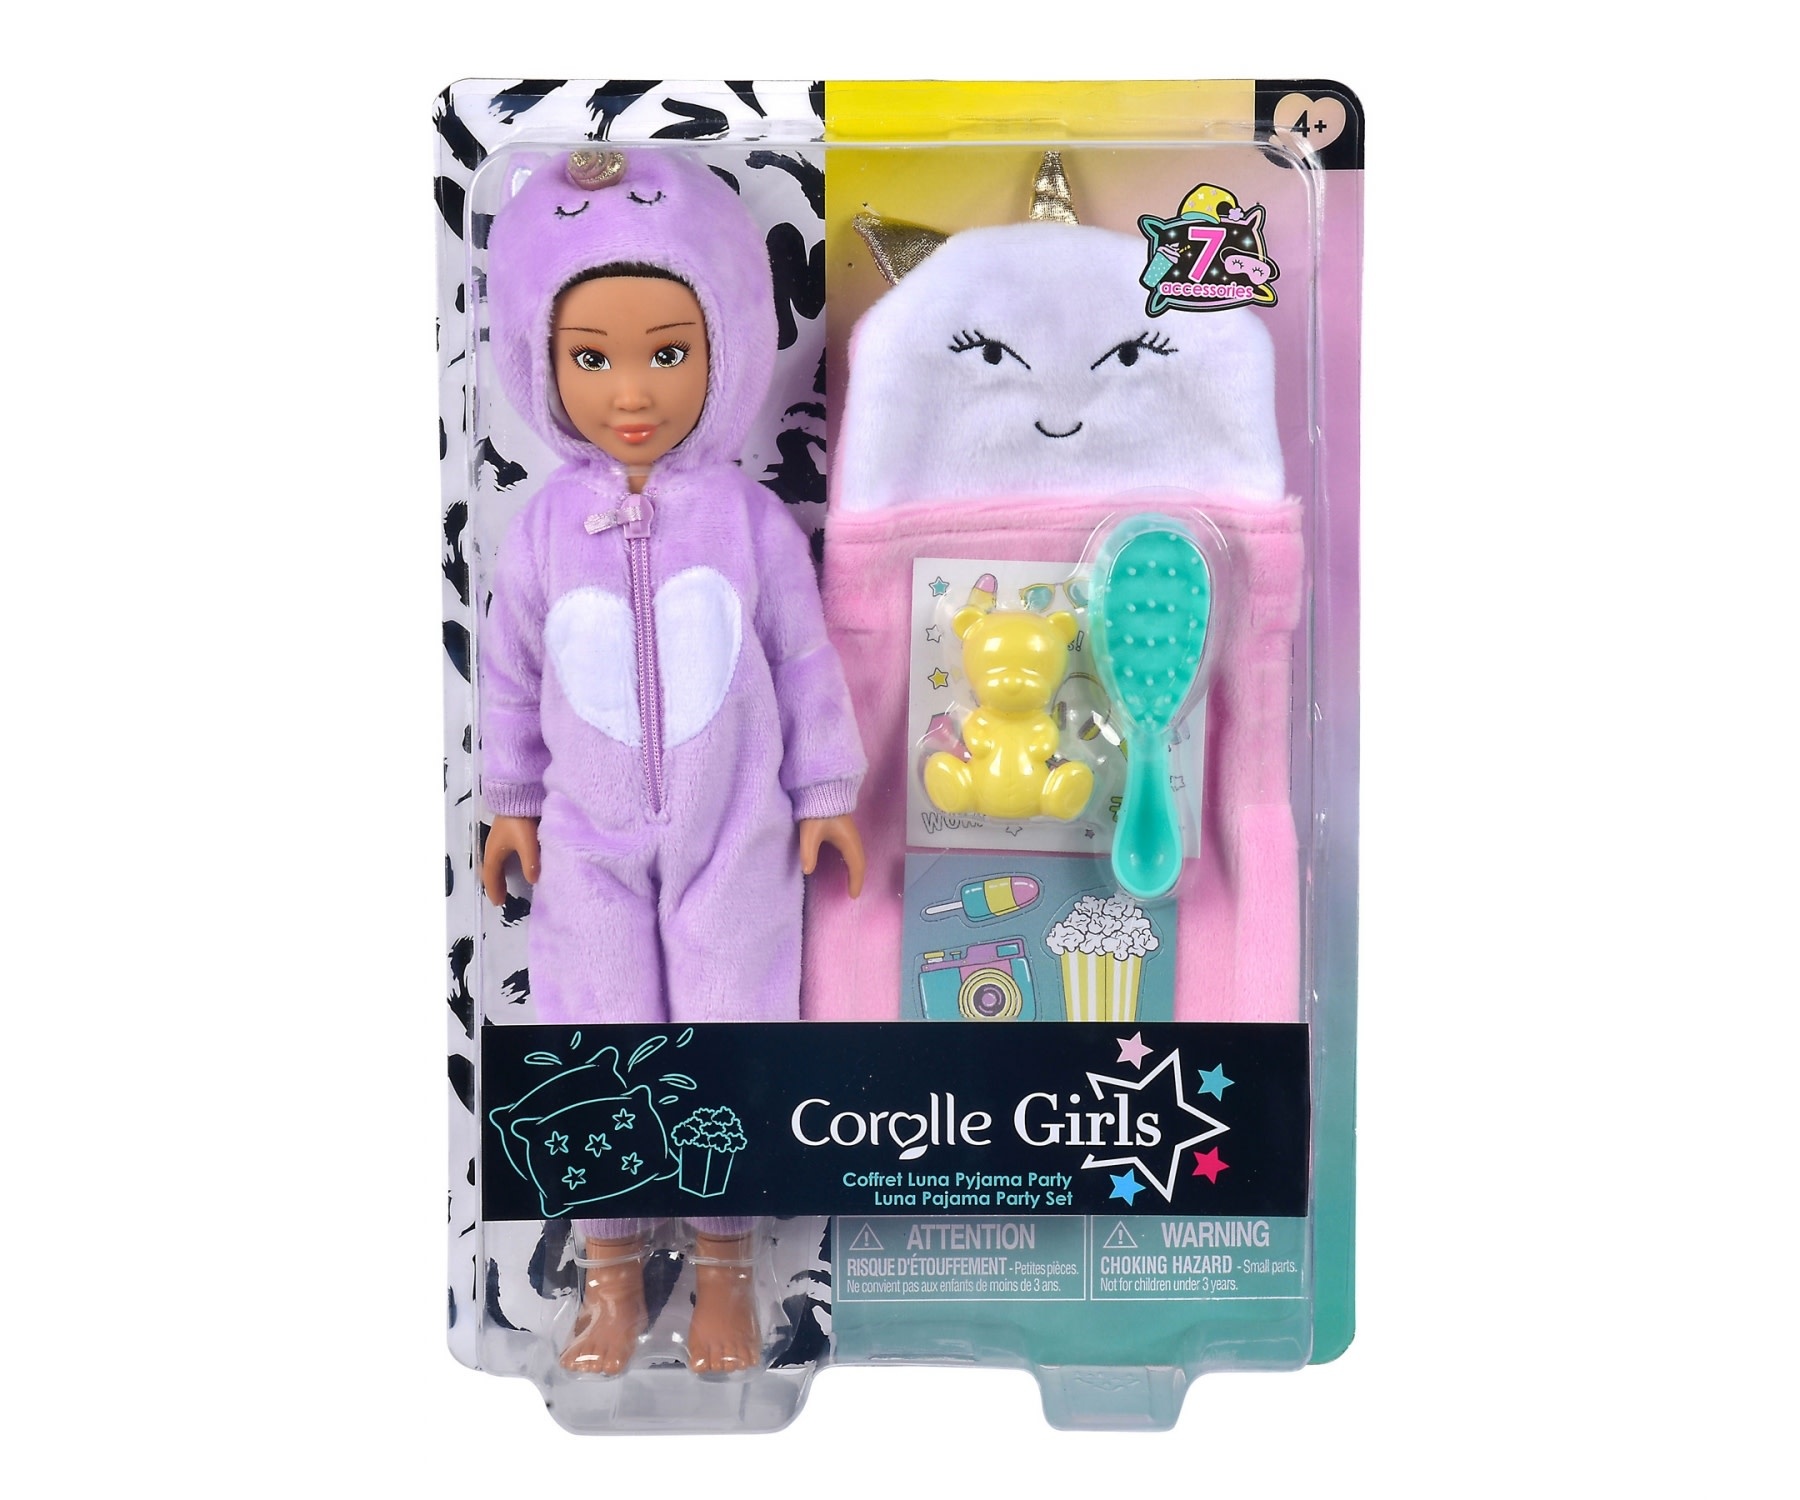 Corolle Girls Zoe Pajama Party Set - The Toy Box Hanover